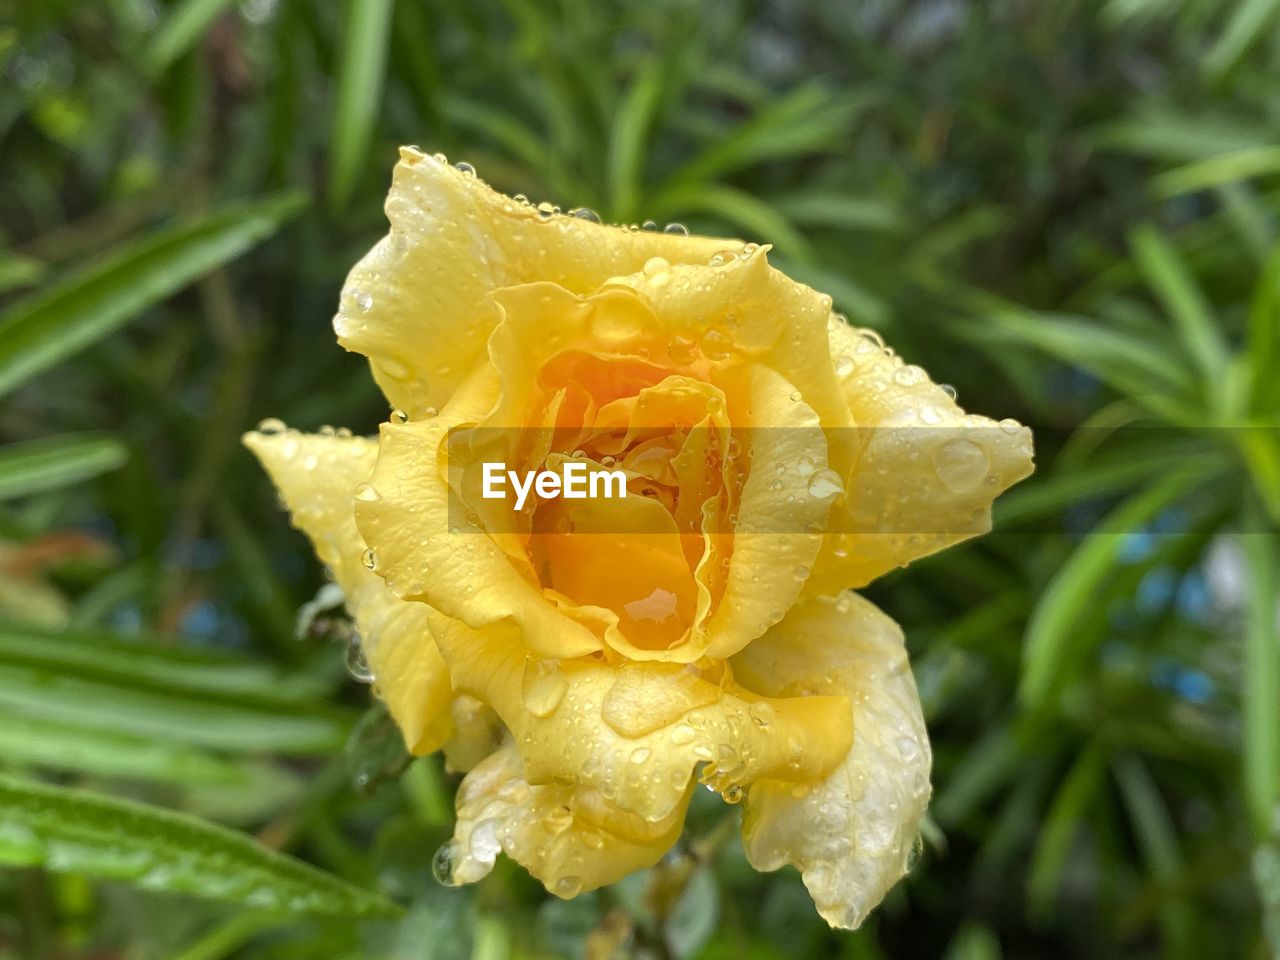 plant, yellow, flower, flowering plant, beauty in nature, nature, freshness, close-up, growth, wet, flower head, petal, drop, inflorescence, fragility, rose, water, no people, outdoors, rain, springtime, focus on foreground, macro photography, green, leaf, plant part, day, dew, food, garden, vegetable, food and drink, botany